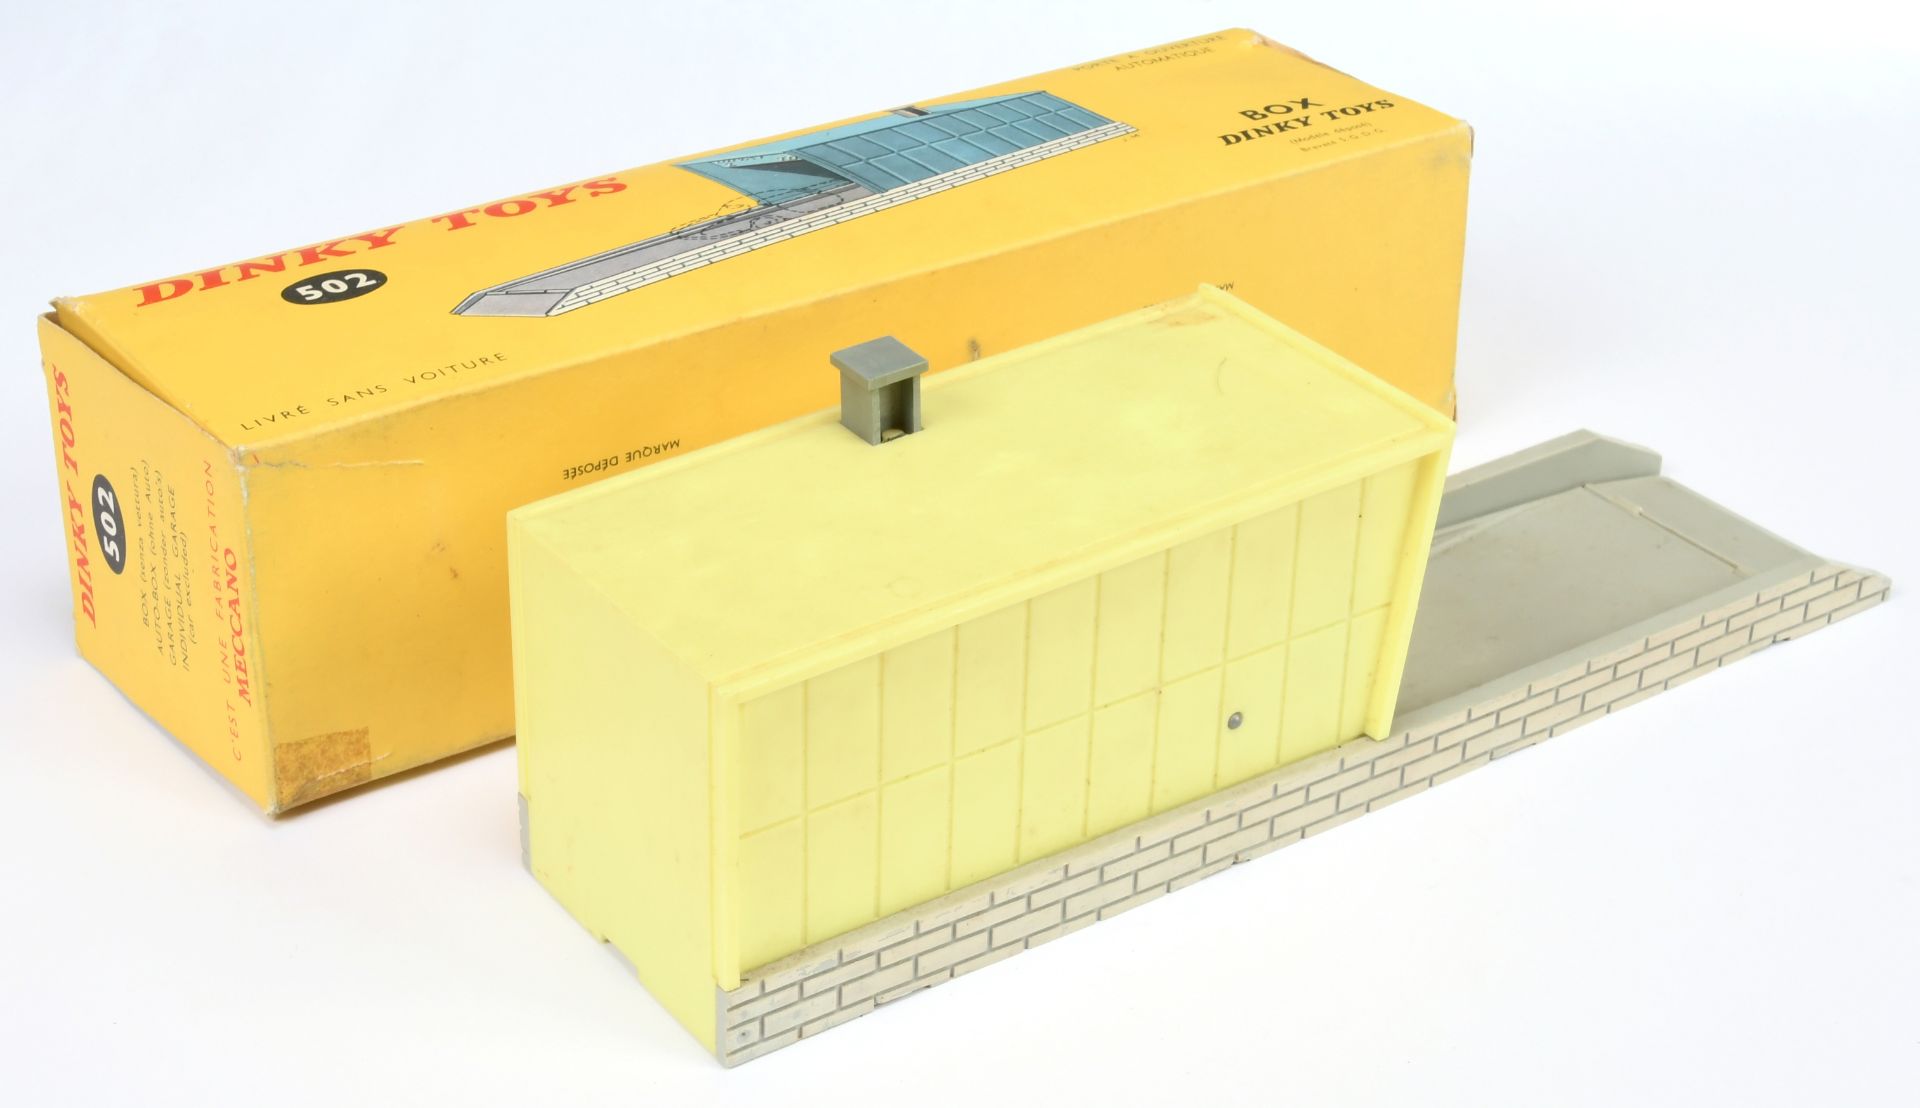 French Dinky Toys 502 Garage - Plastic issue grey base and opening door, with bright yellow garage  - Image 2 of 2